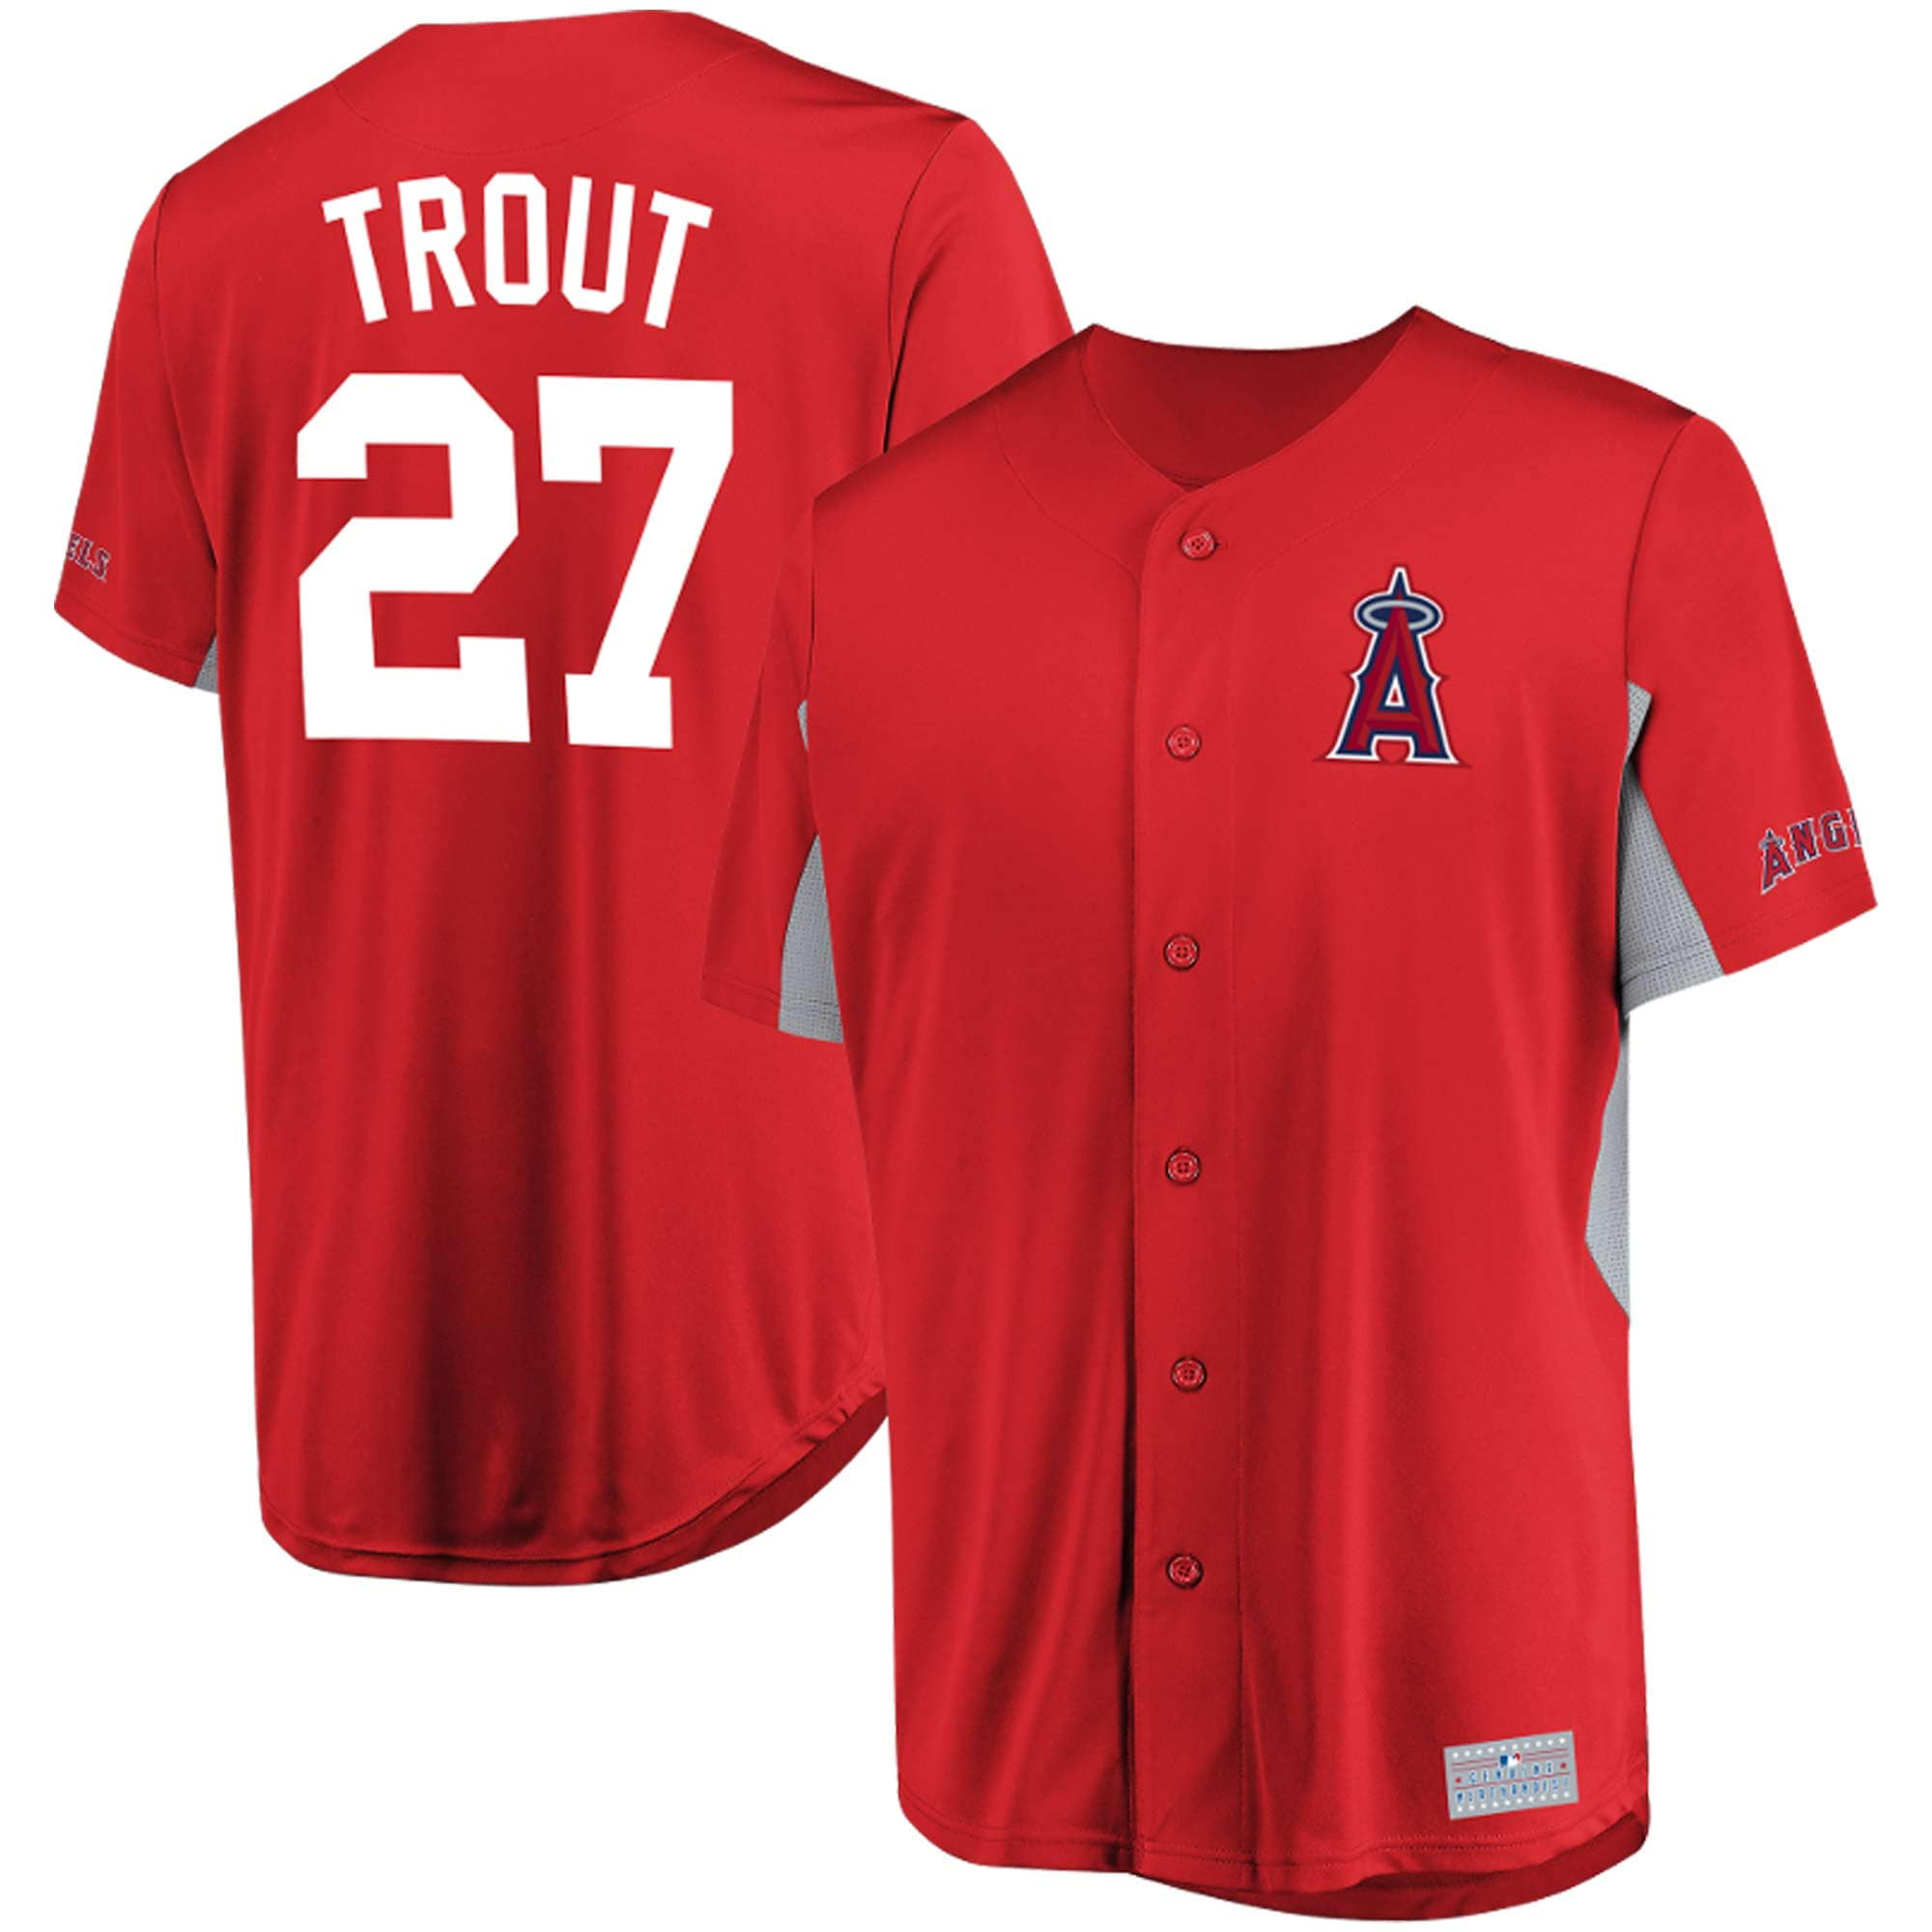 Mike Trout Los Angeles Angels Majestic MLB Jersey - Red - Walmart.com ...